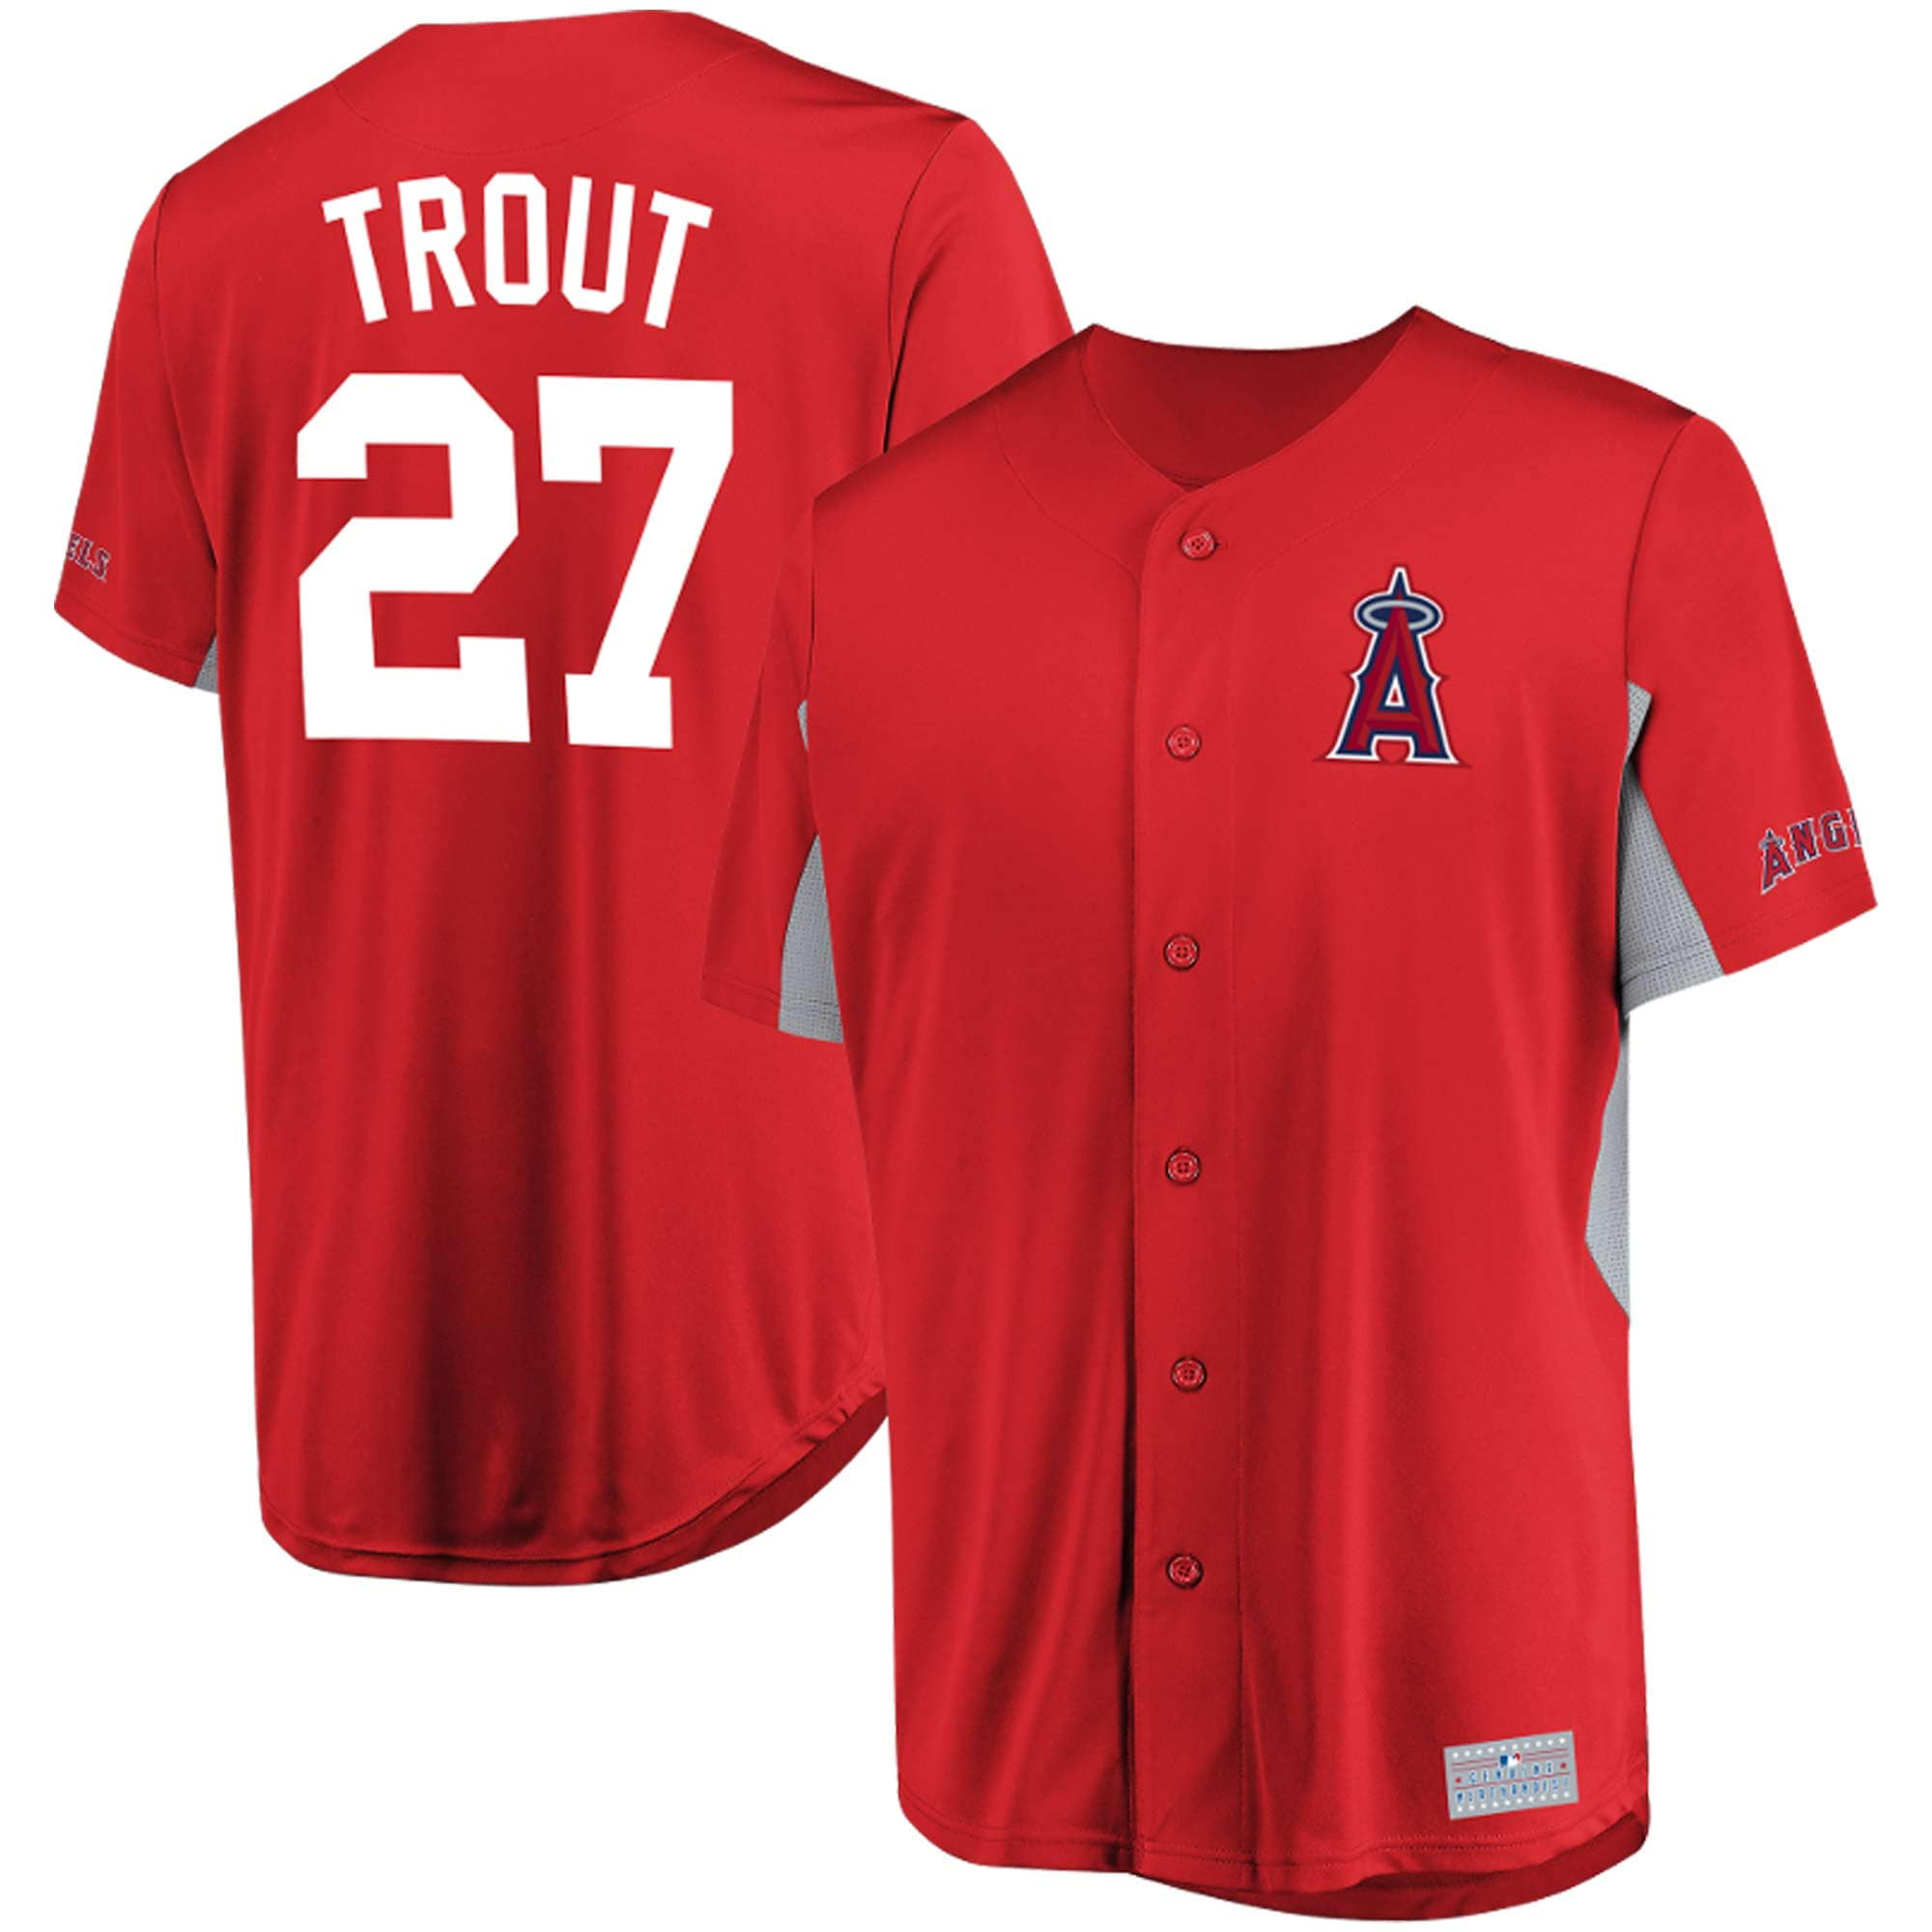 Mike Trout Los Angeles Angels Majestic MLB Jersey - Red - Walmart.com ...